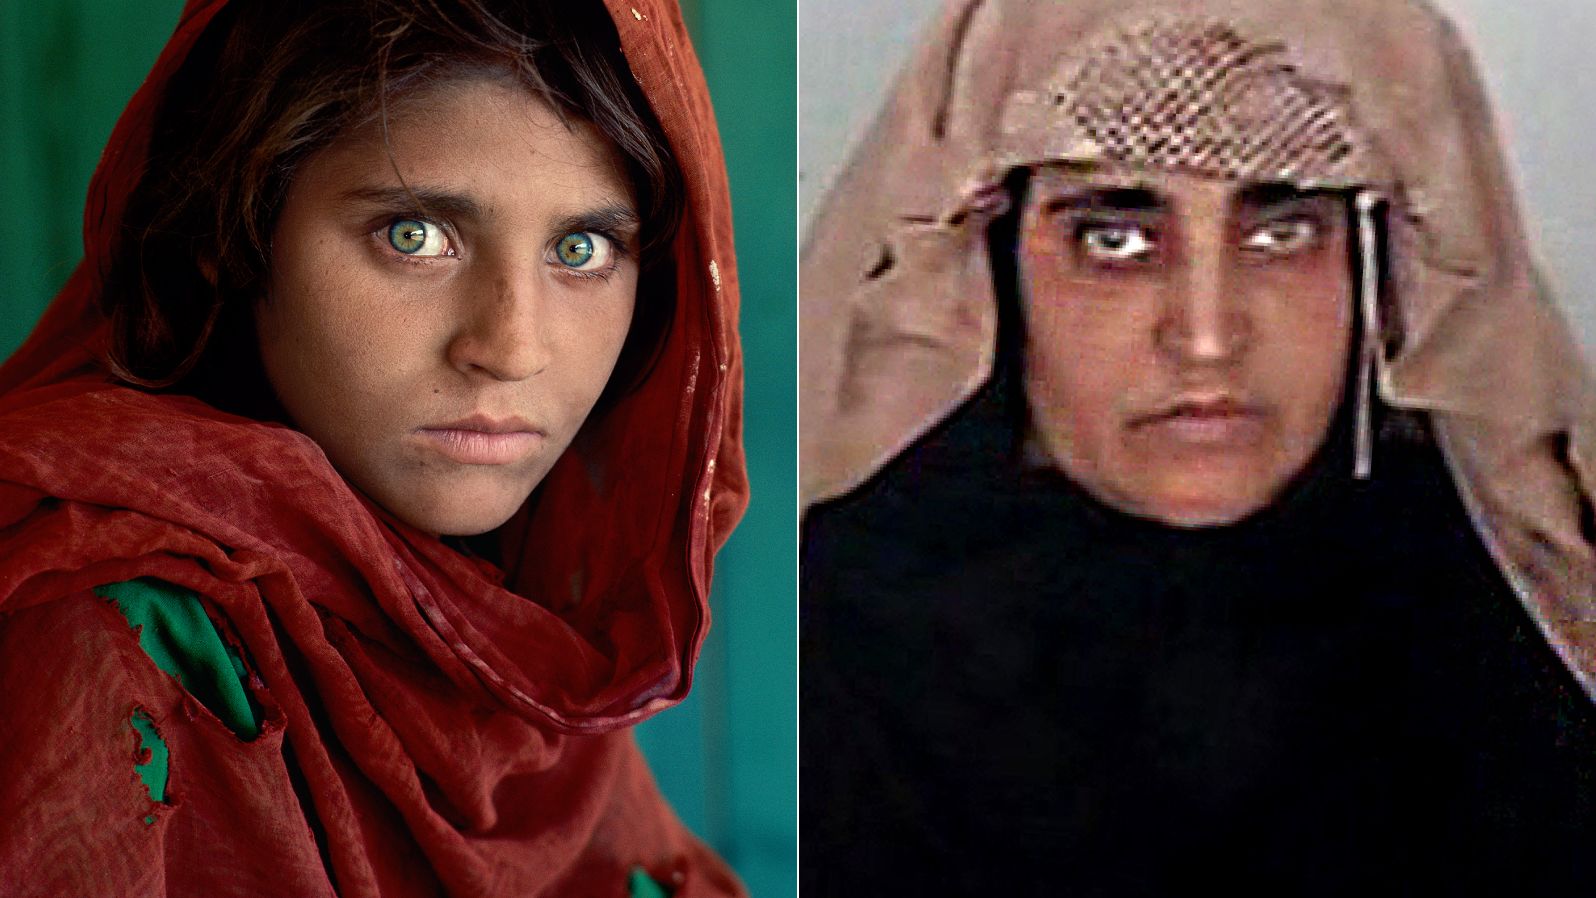 "Afghan Girl" Sharbat Gula in her famous National Geographic portrait, left, and, right, after her arrest Tuesday October 25